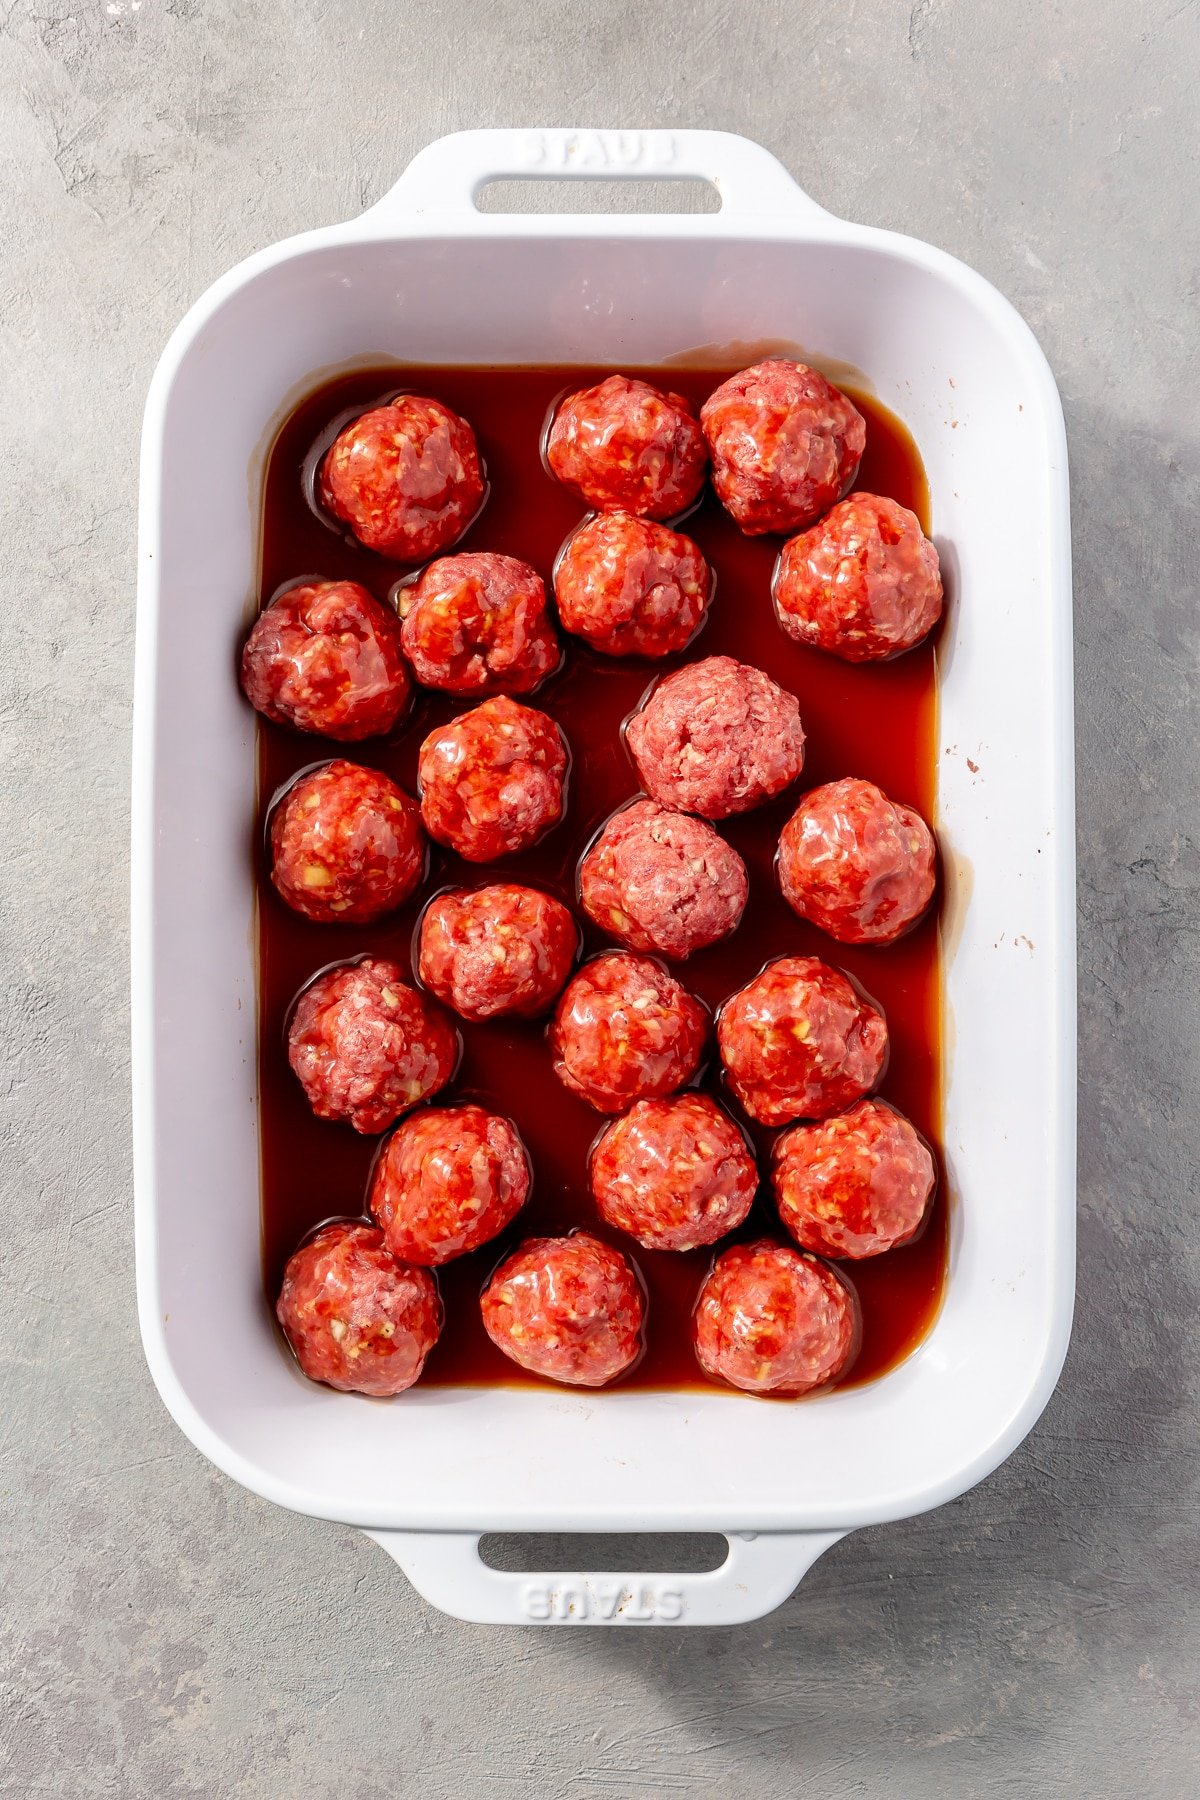 The red sauce has been poured over the top of the meatballs.